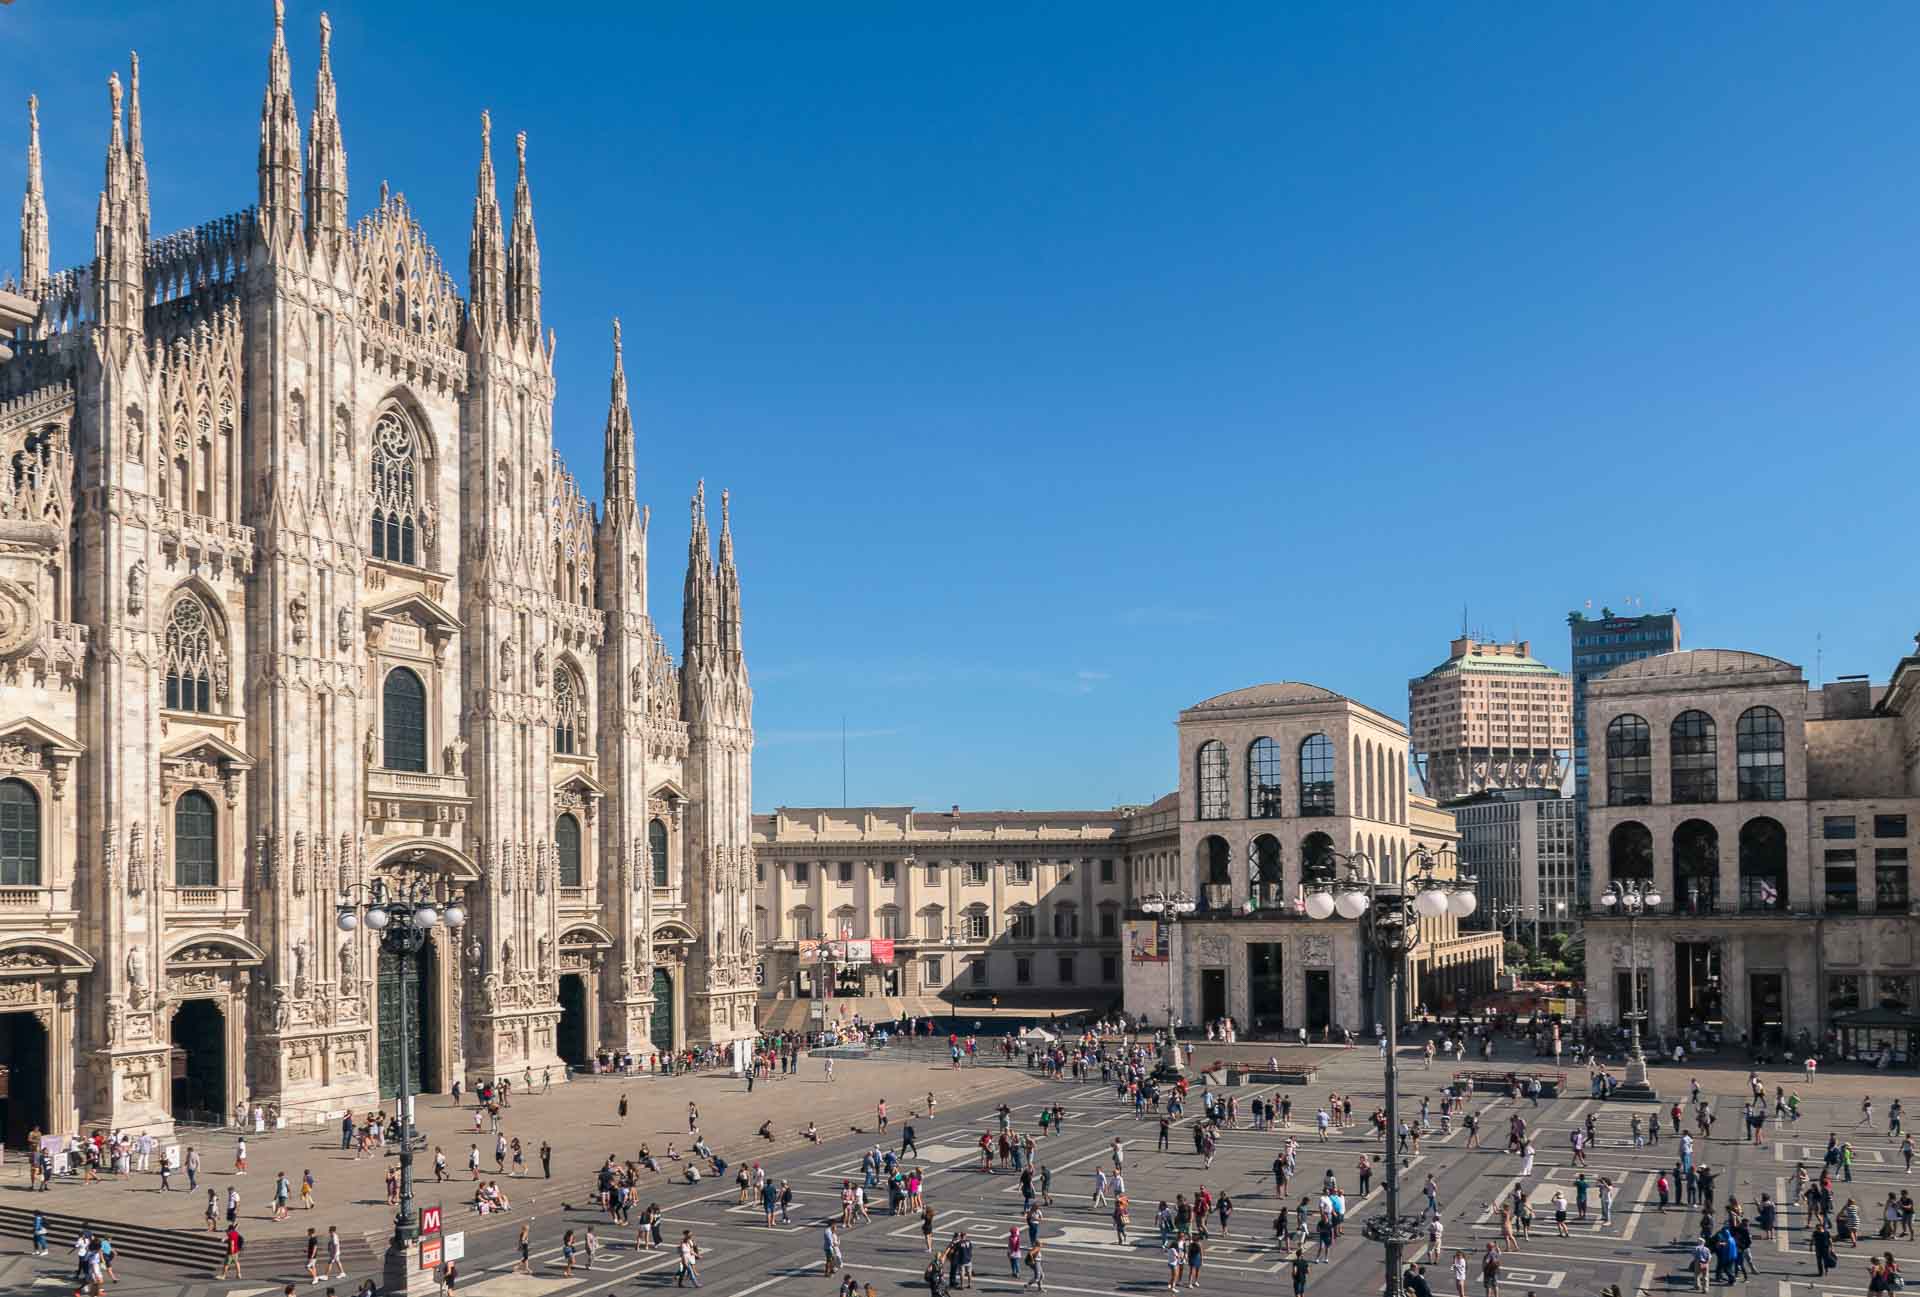 A view of the main church of Milan and the square full of people